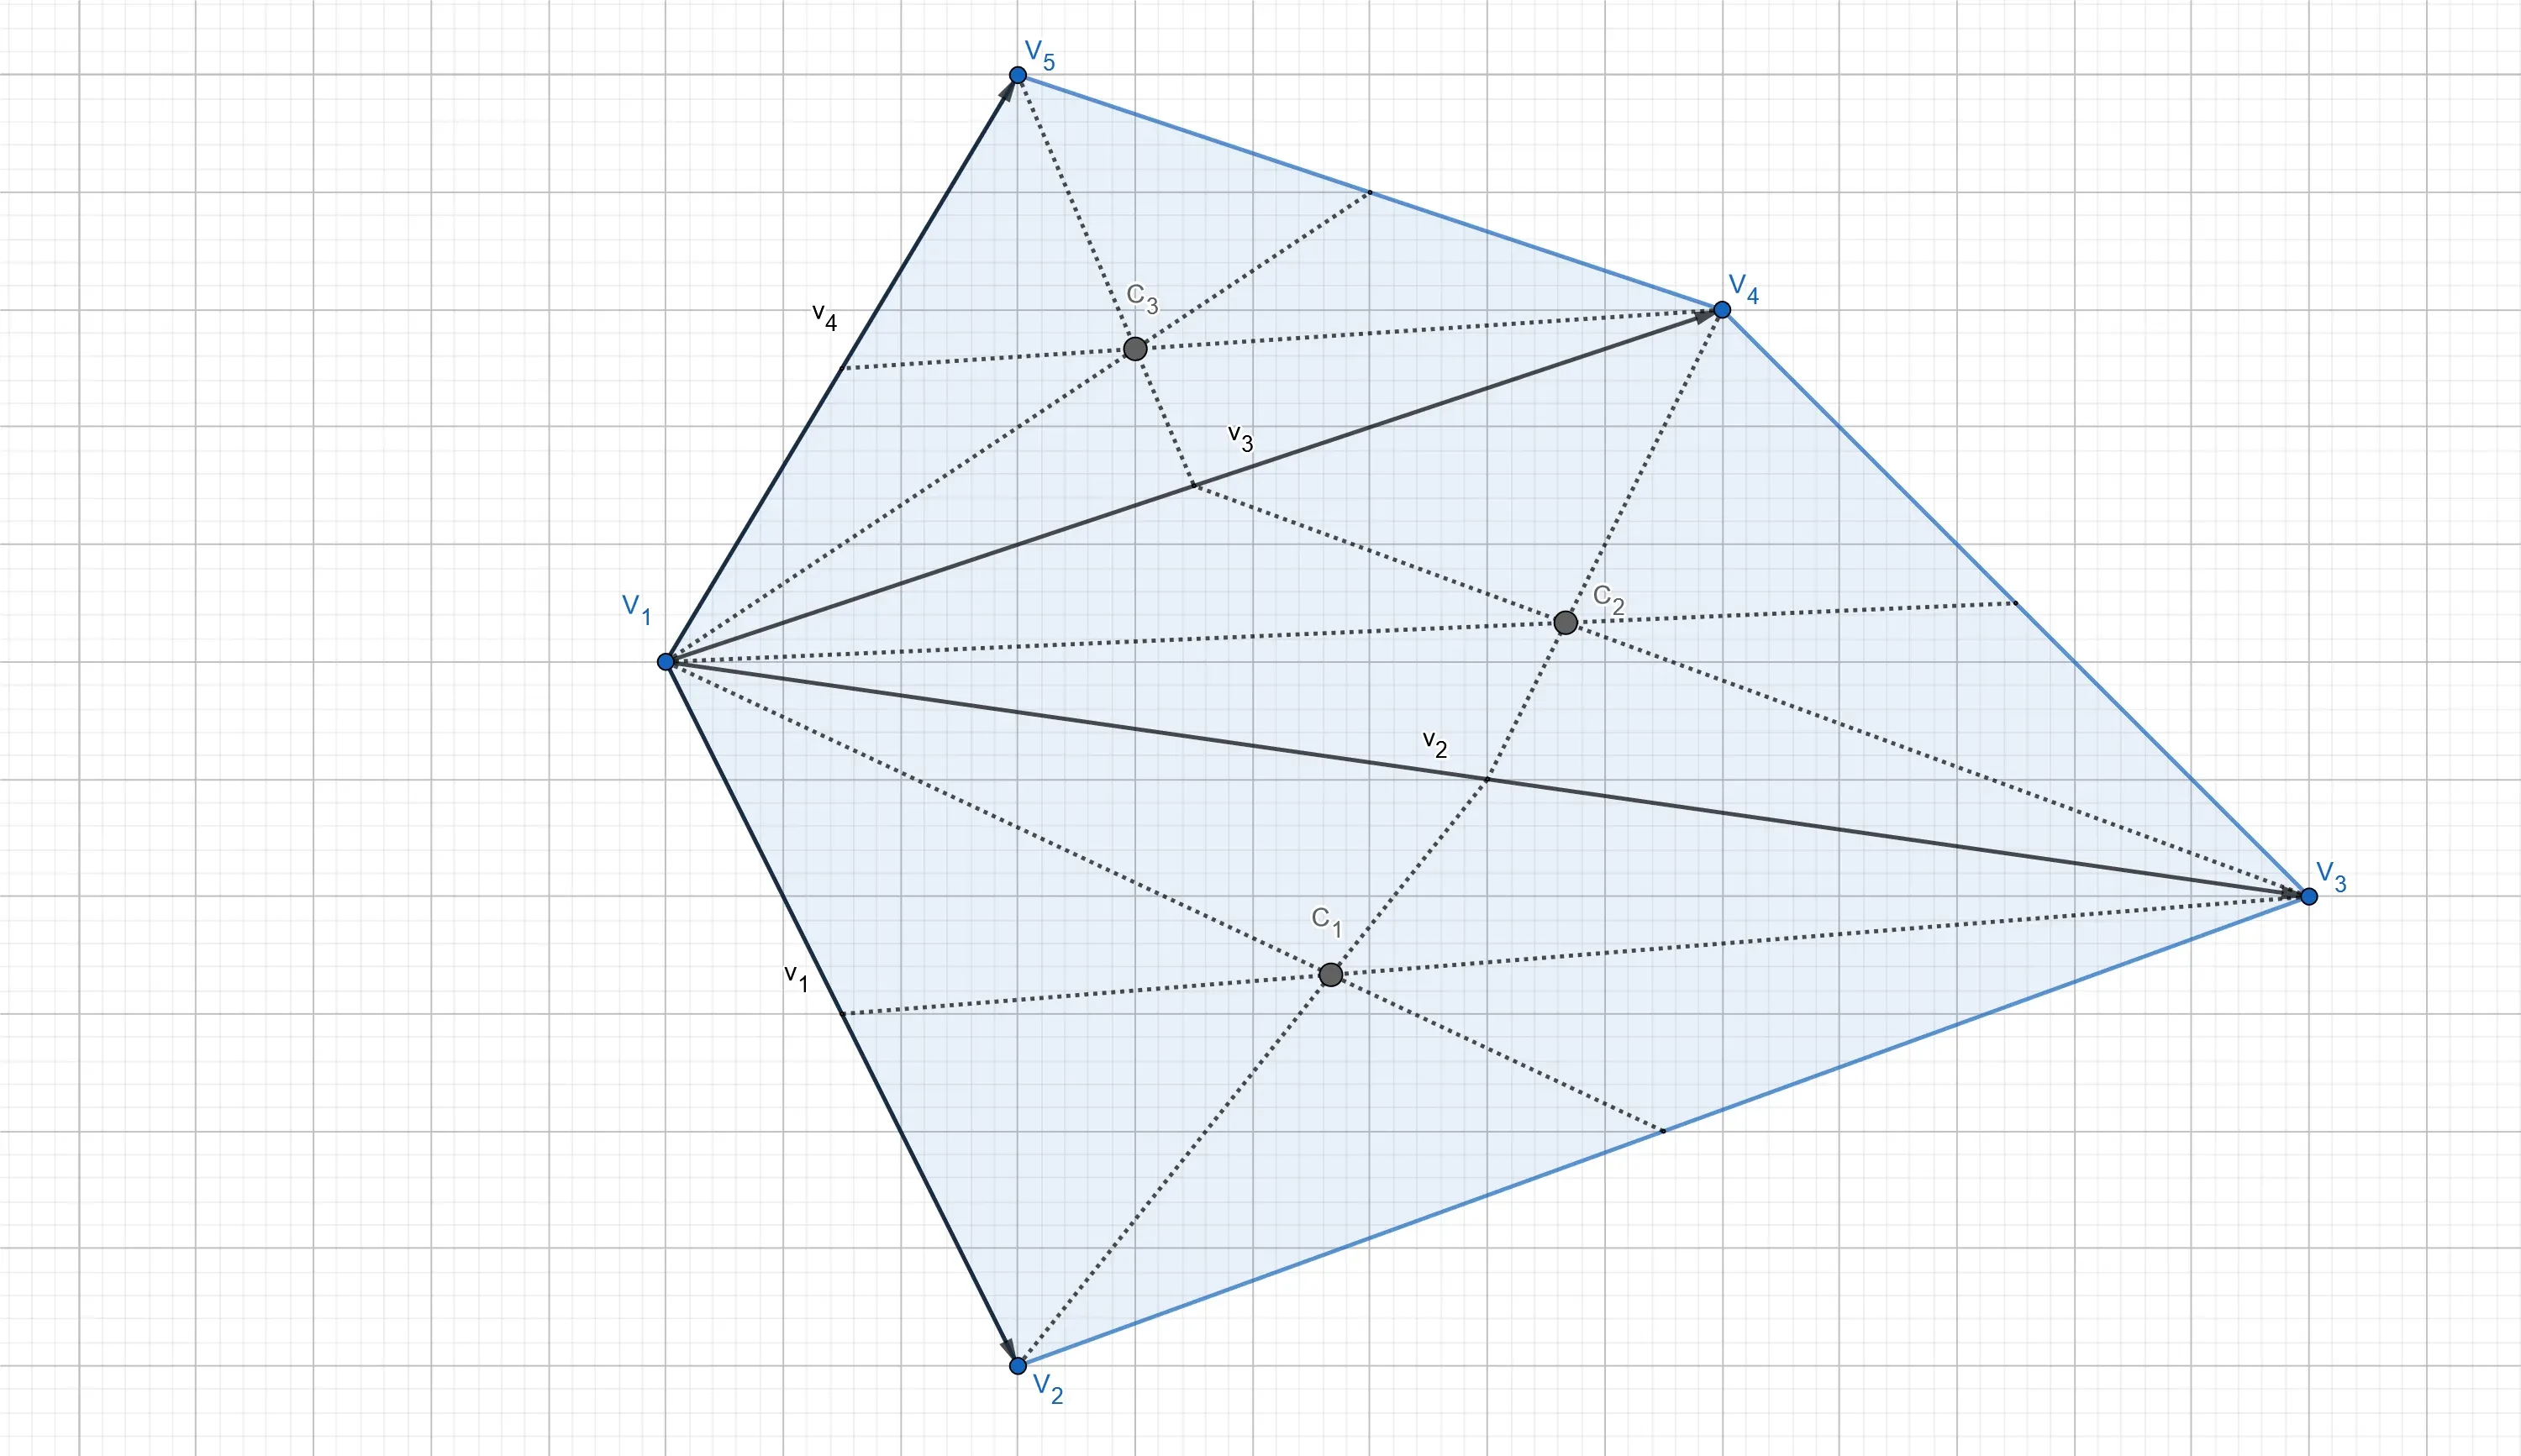 The barycentres of the triangles resulting from the triangulation of the polygon